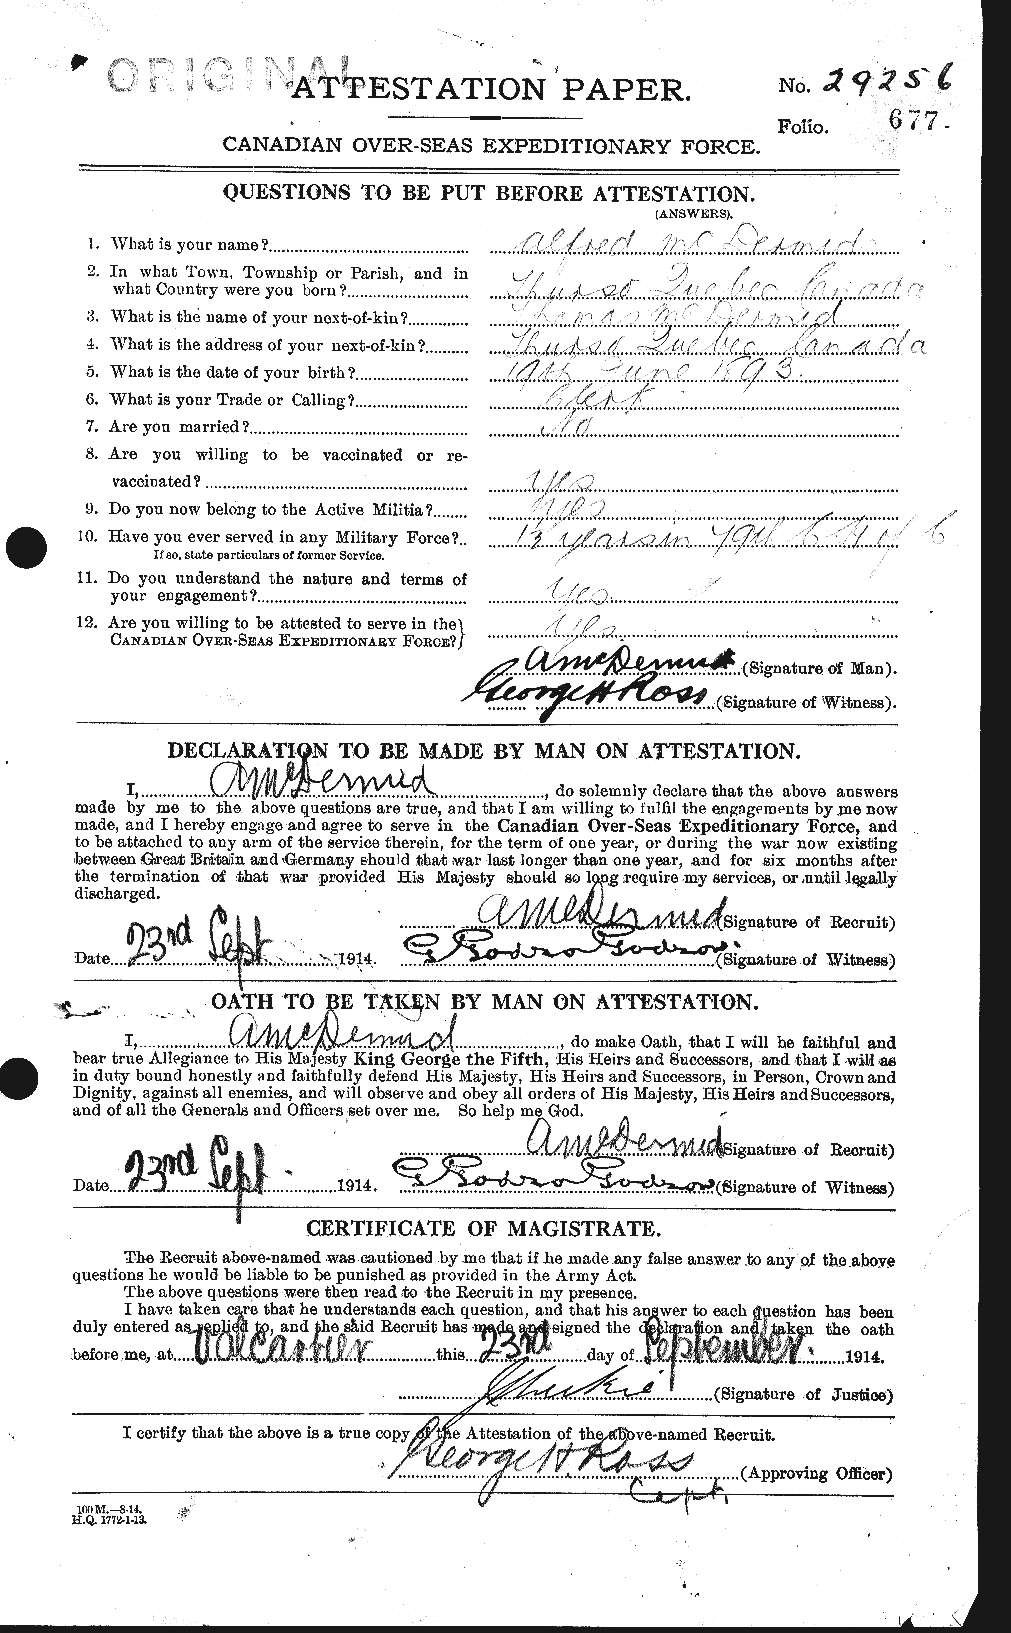 Personnel Records of the First World War - CEF 136168a